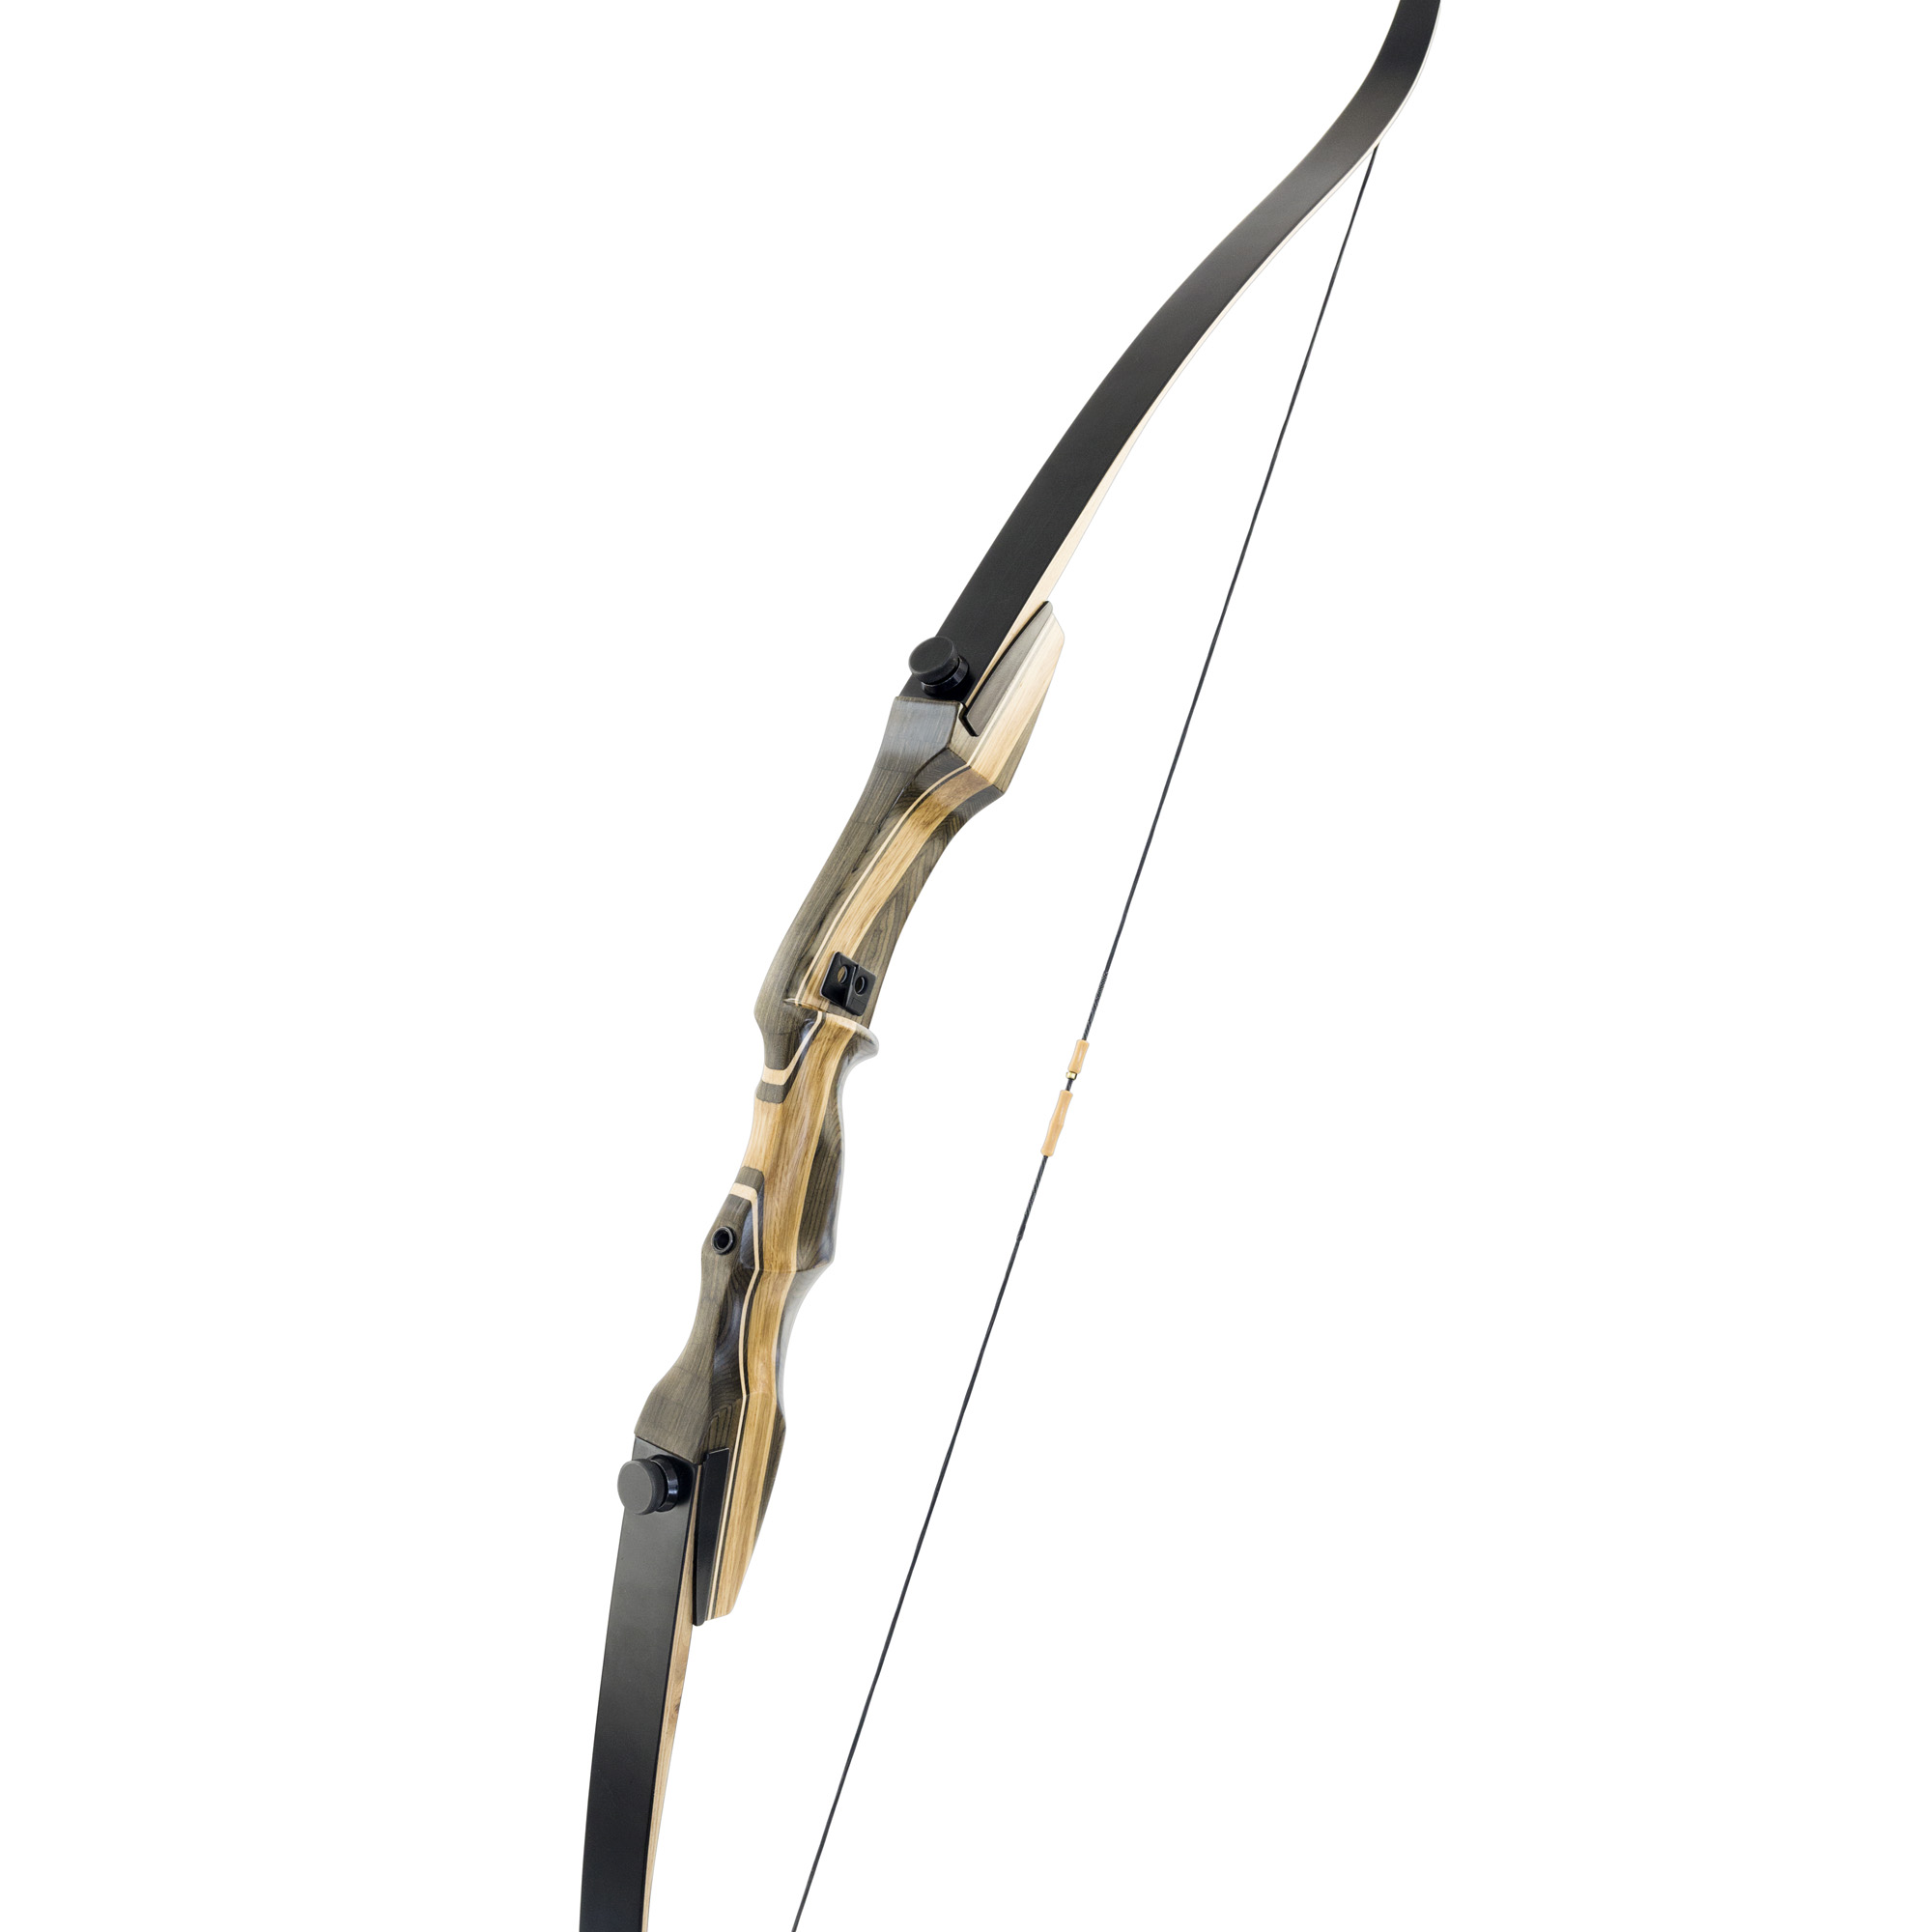 Pro Bow Angelrolle für Compound Bow Recurve Bow Target Shooting Hunting 